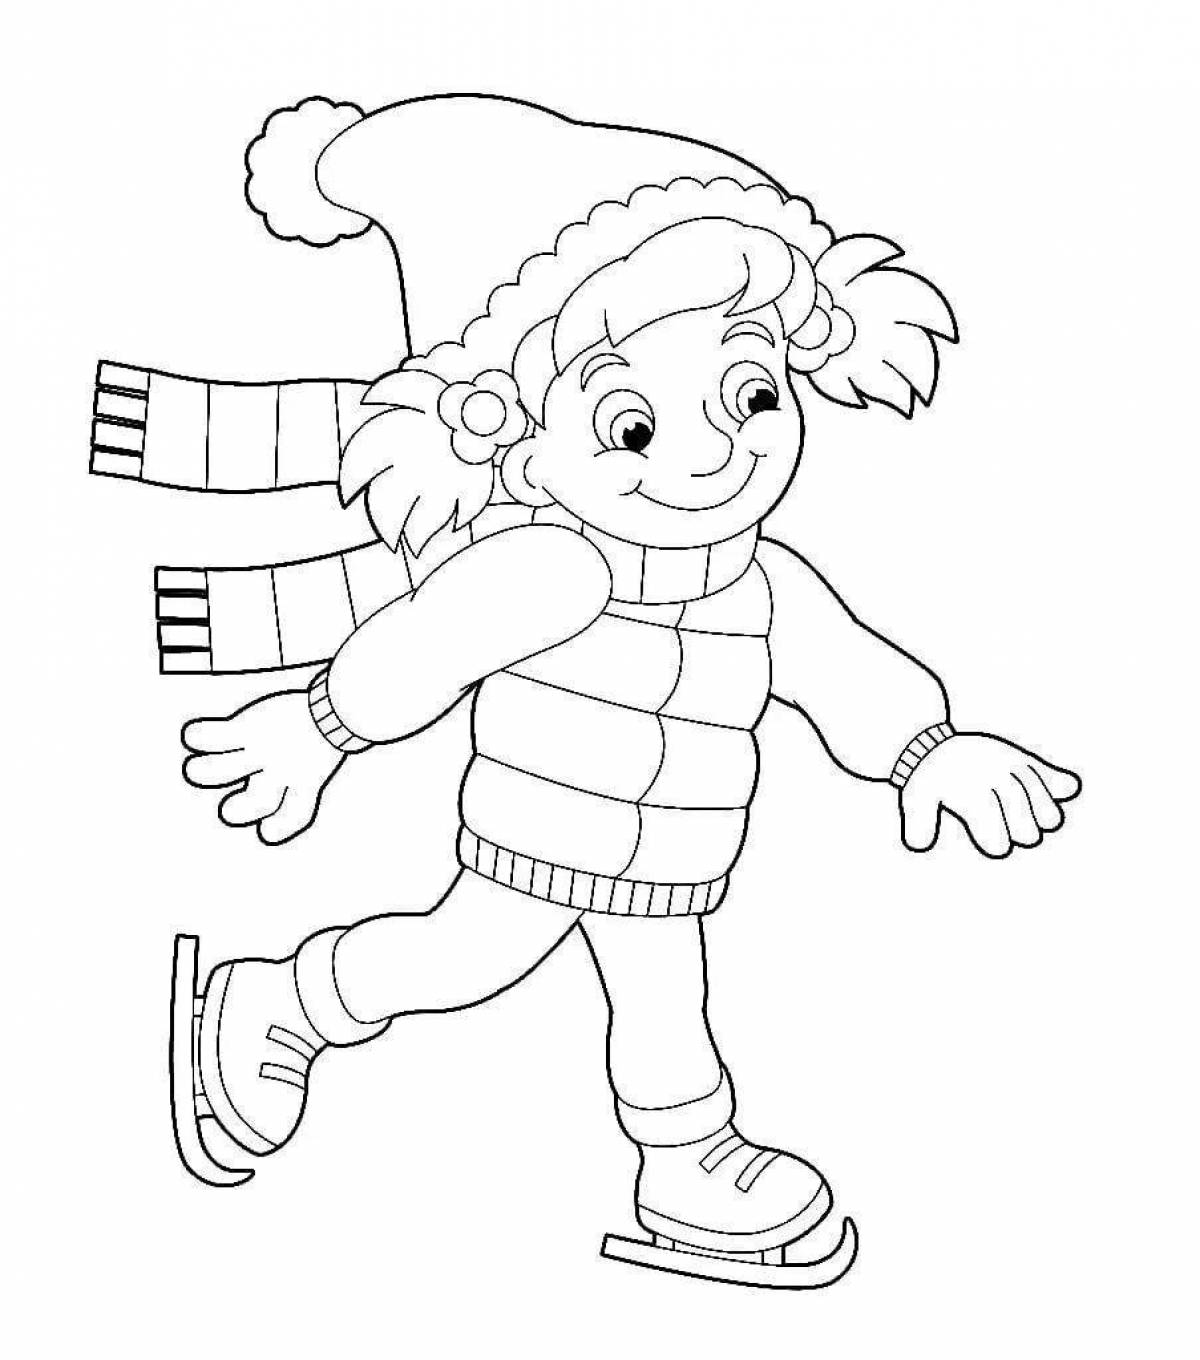 Fun coloring book for kids ice skating